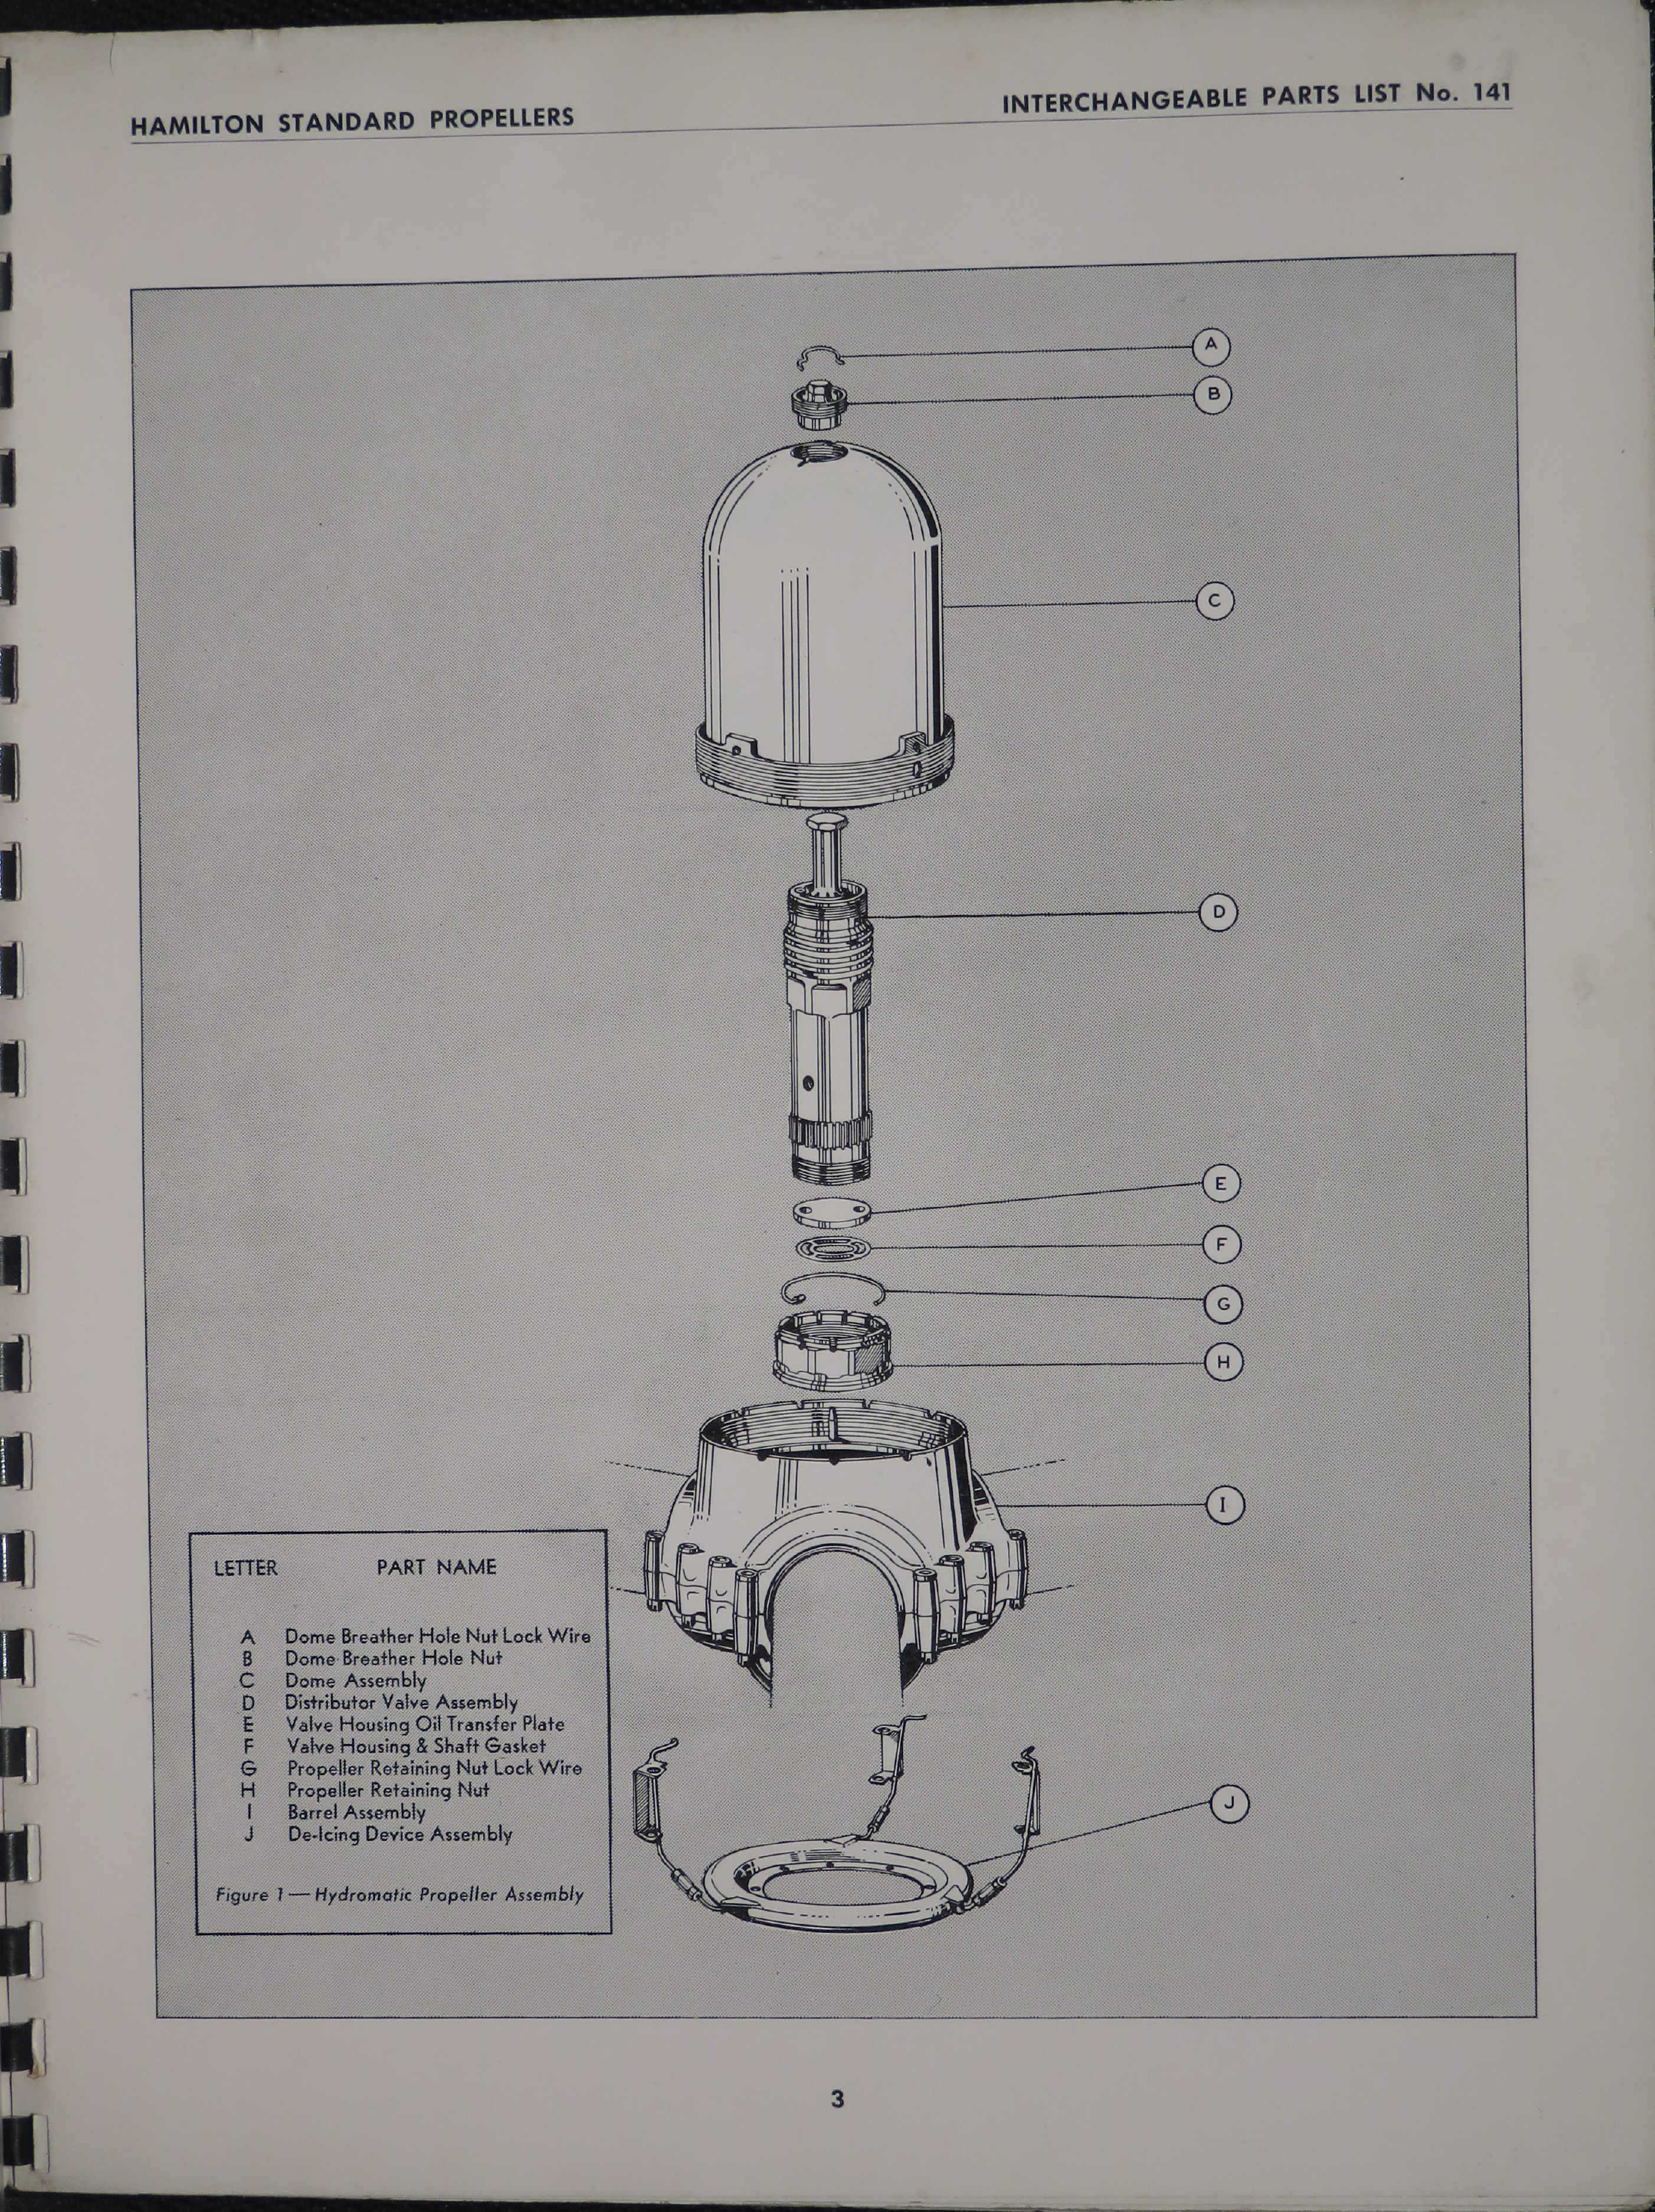 Sample page 9 from AirCorps Library document: Interchangeable Parts List for Quick-Feathering Hydromatic Propellers